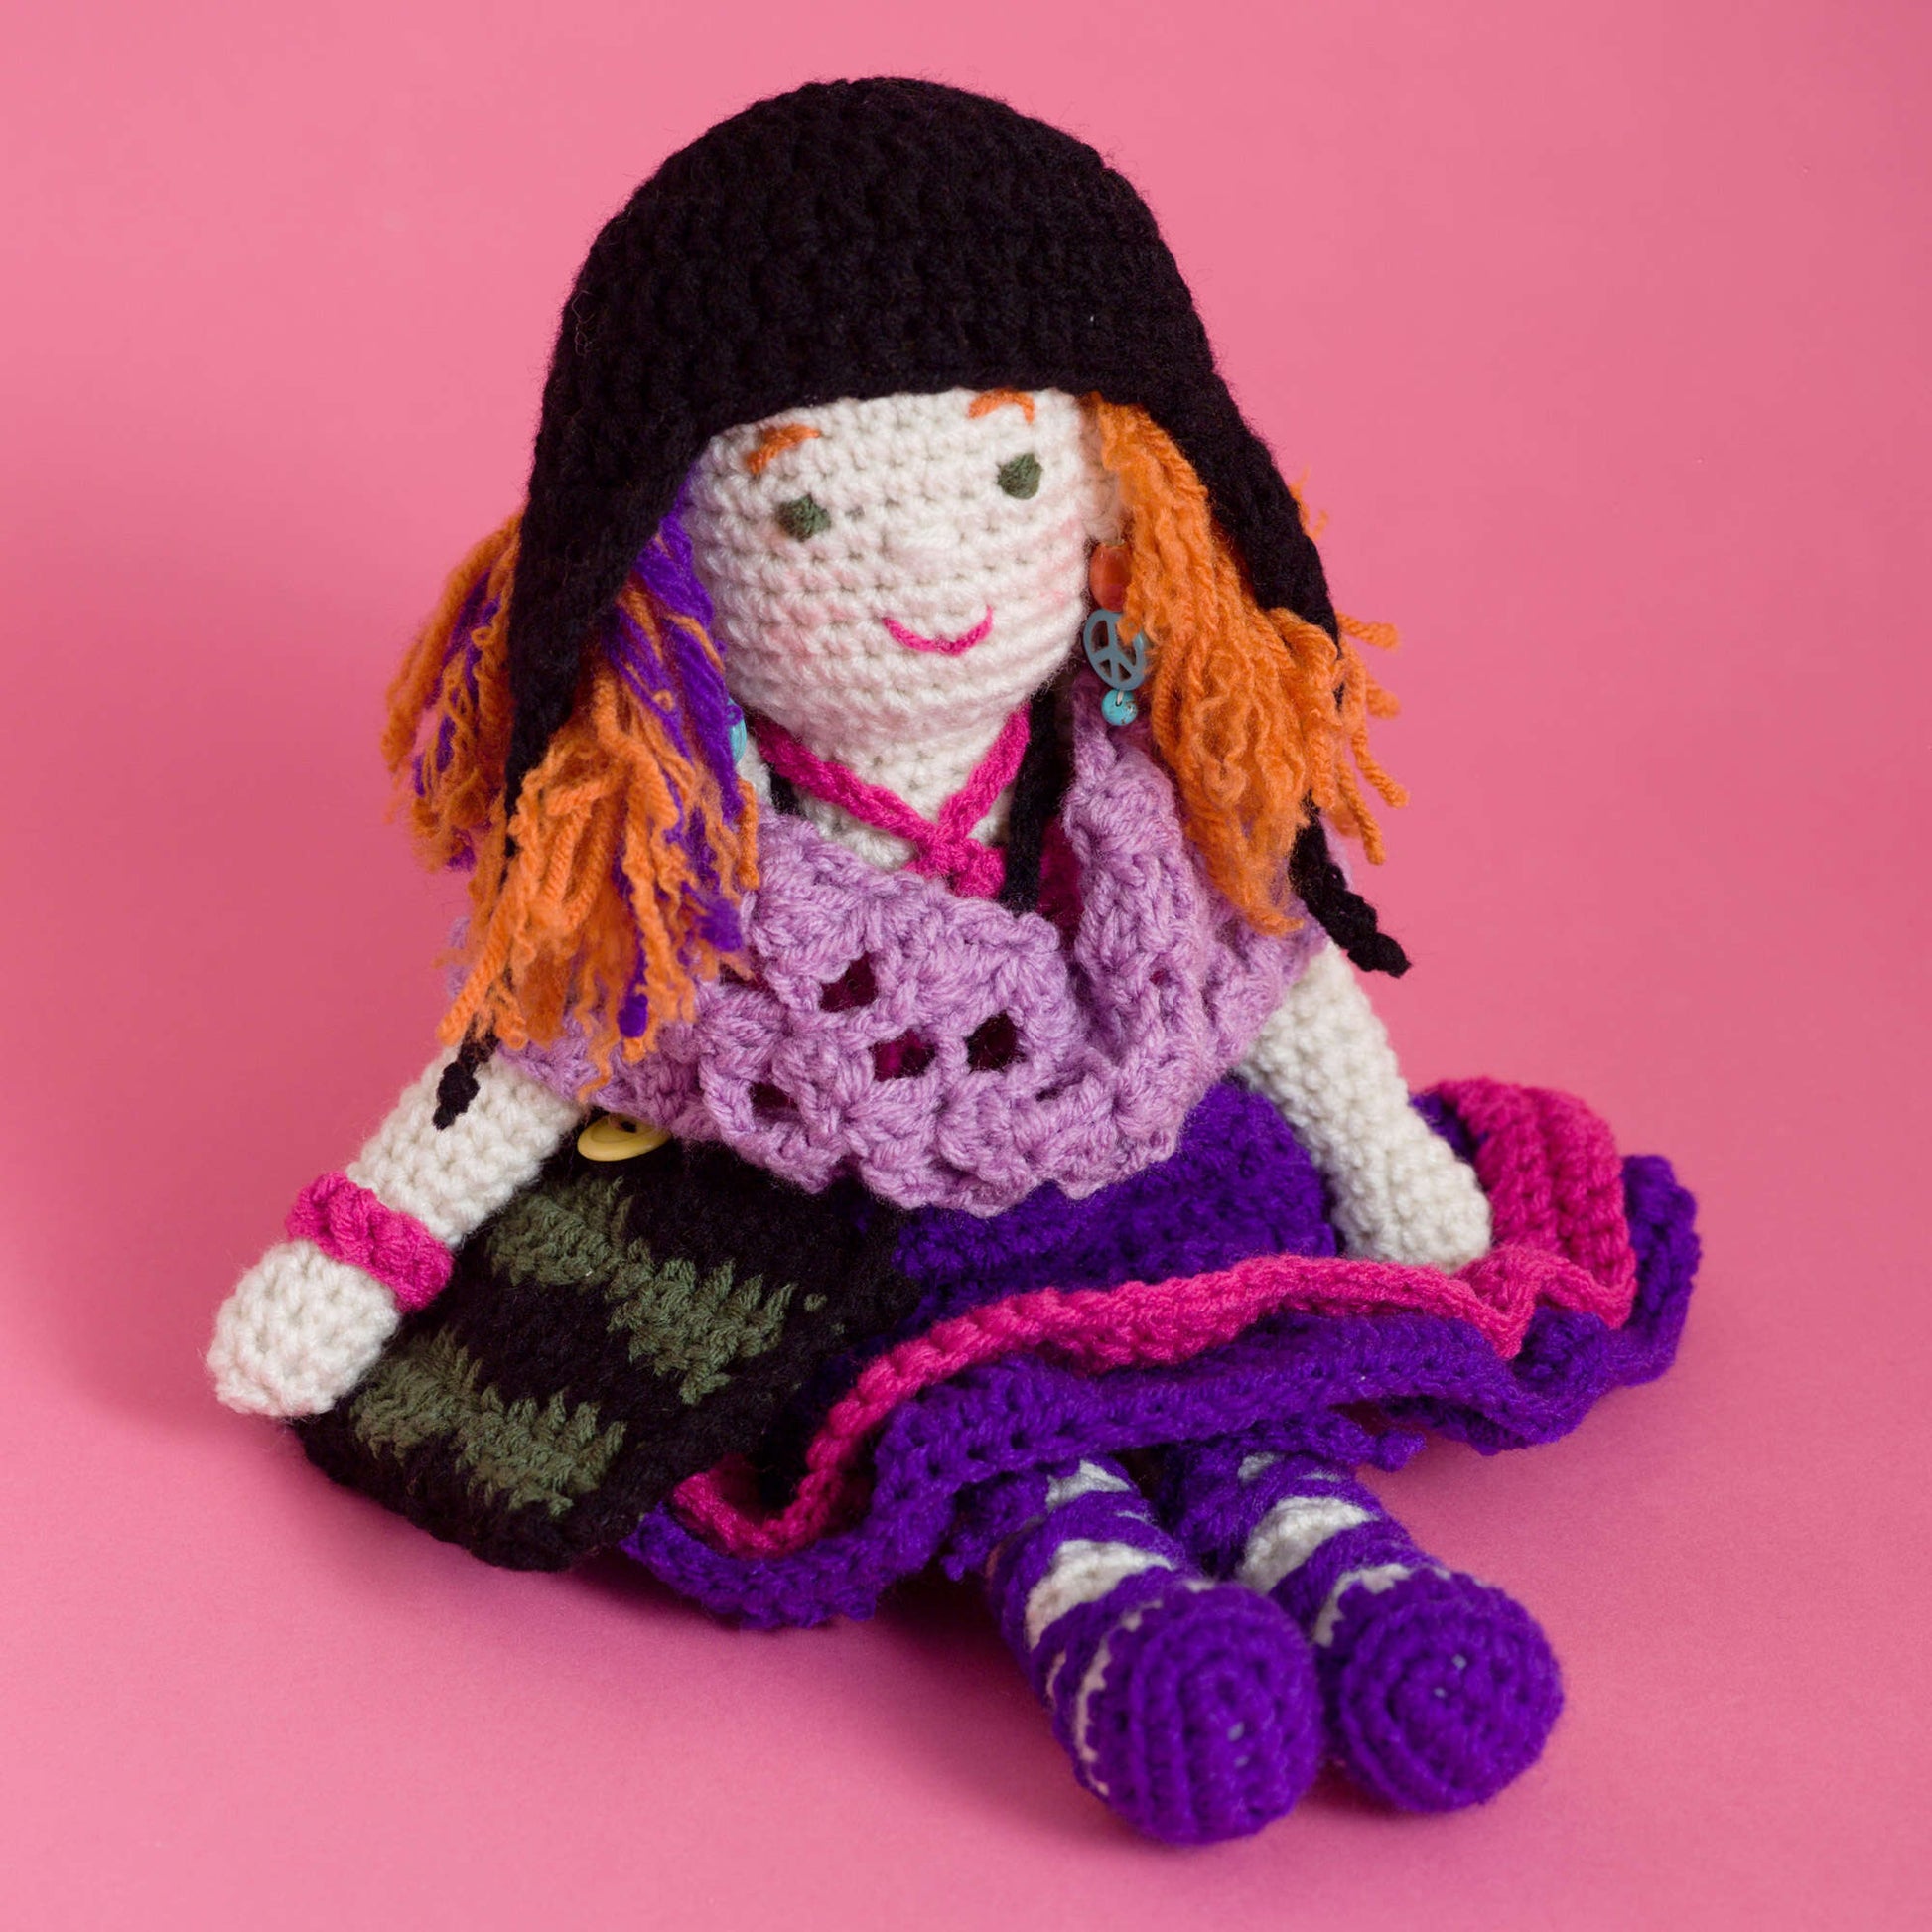 Free Red Heart Artistic Annie Doll Pattern